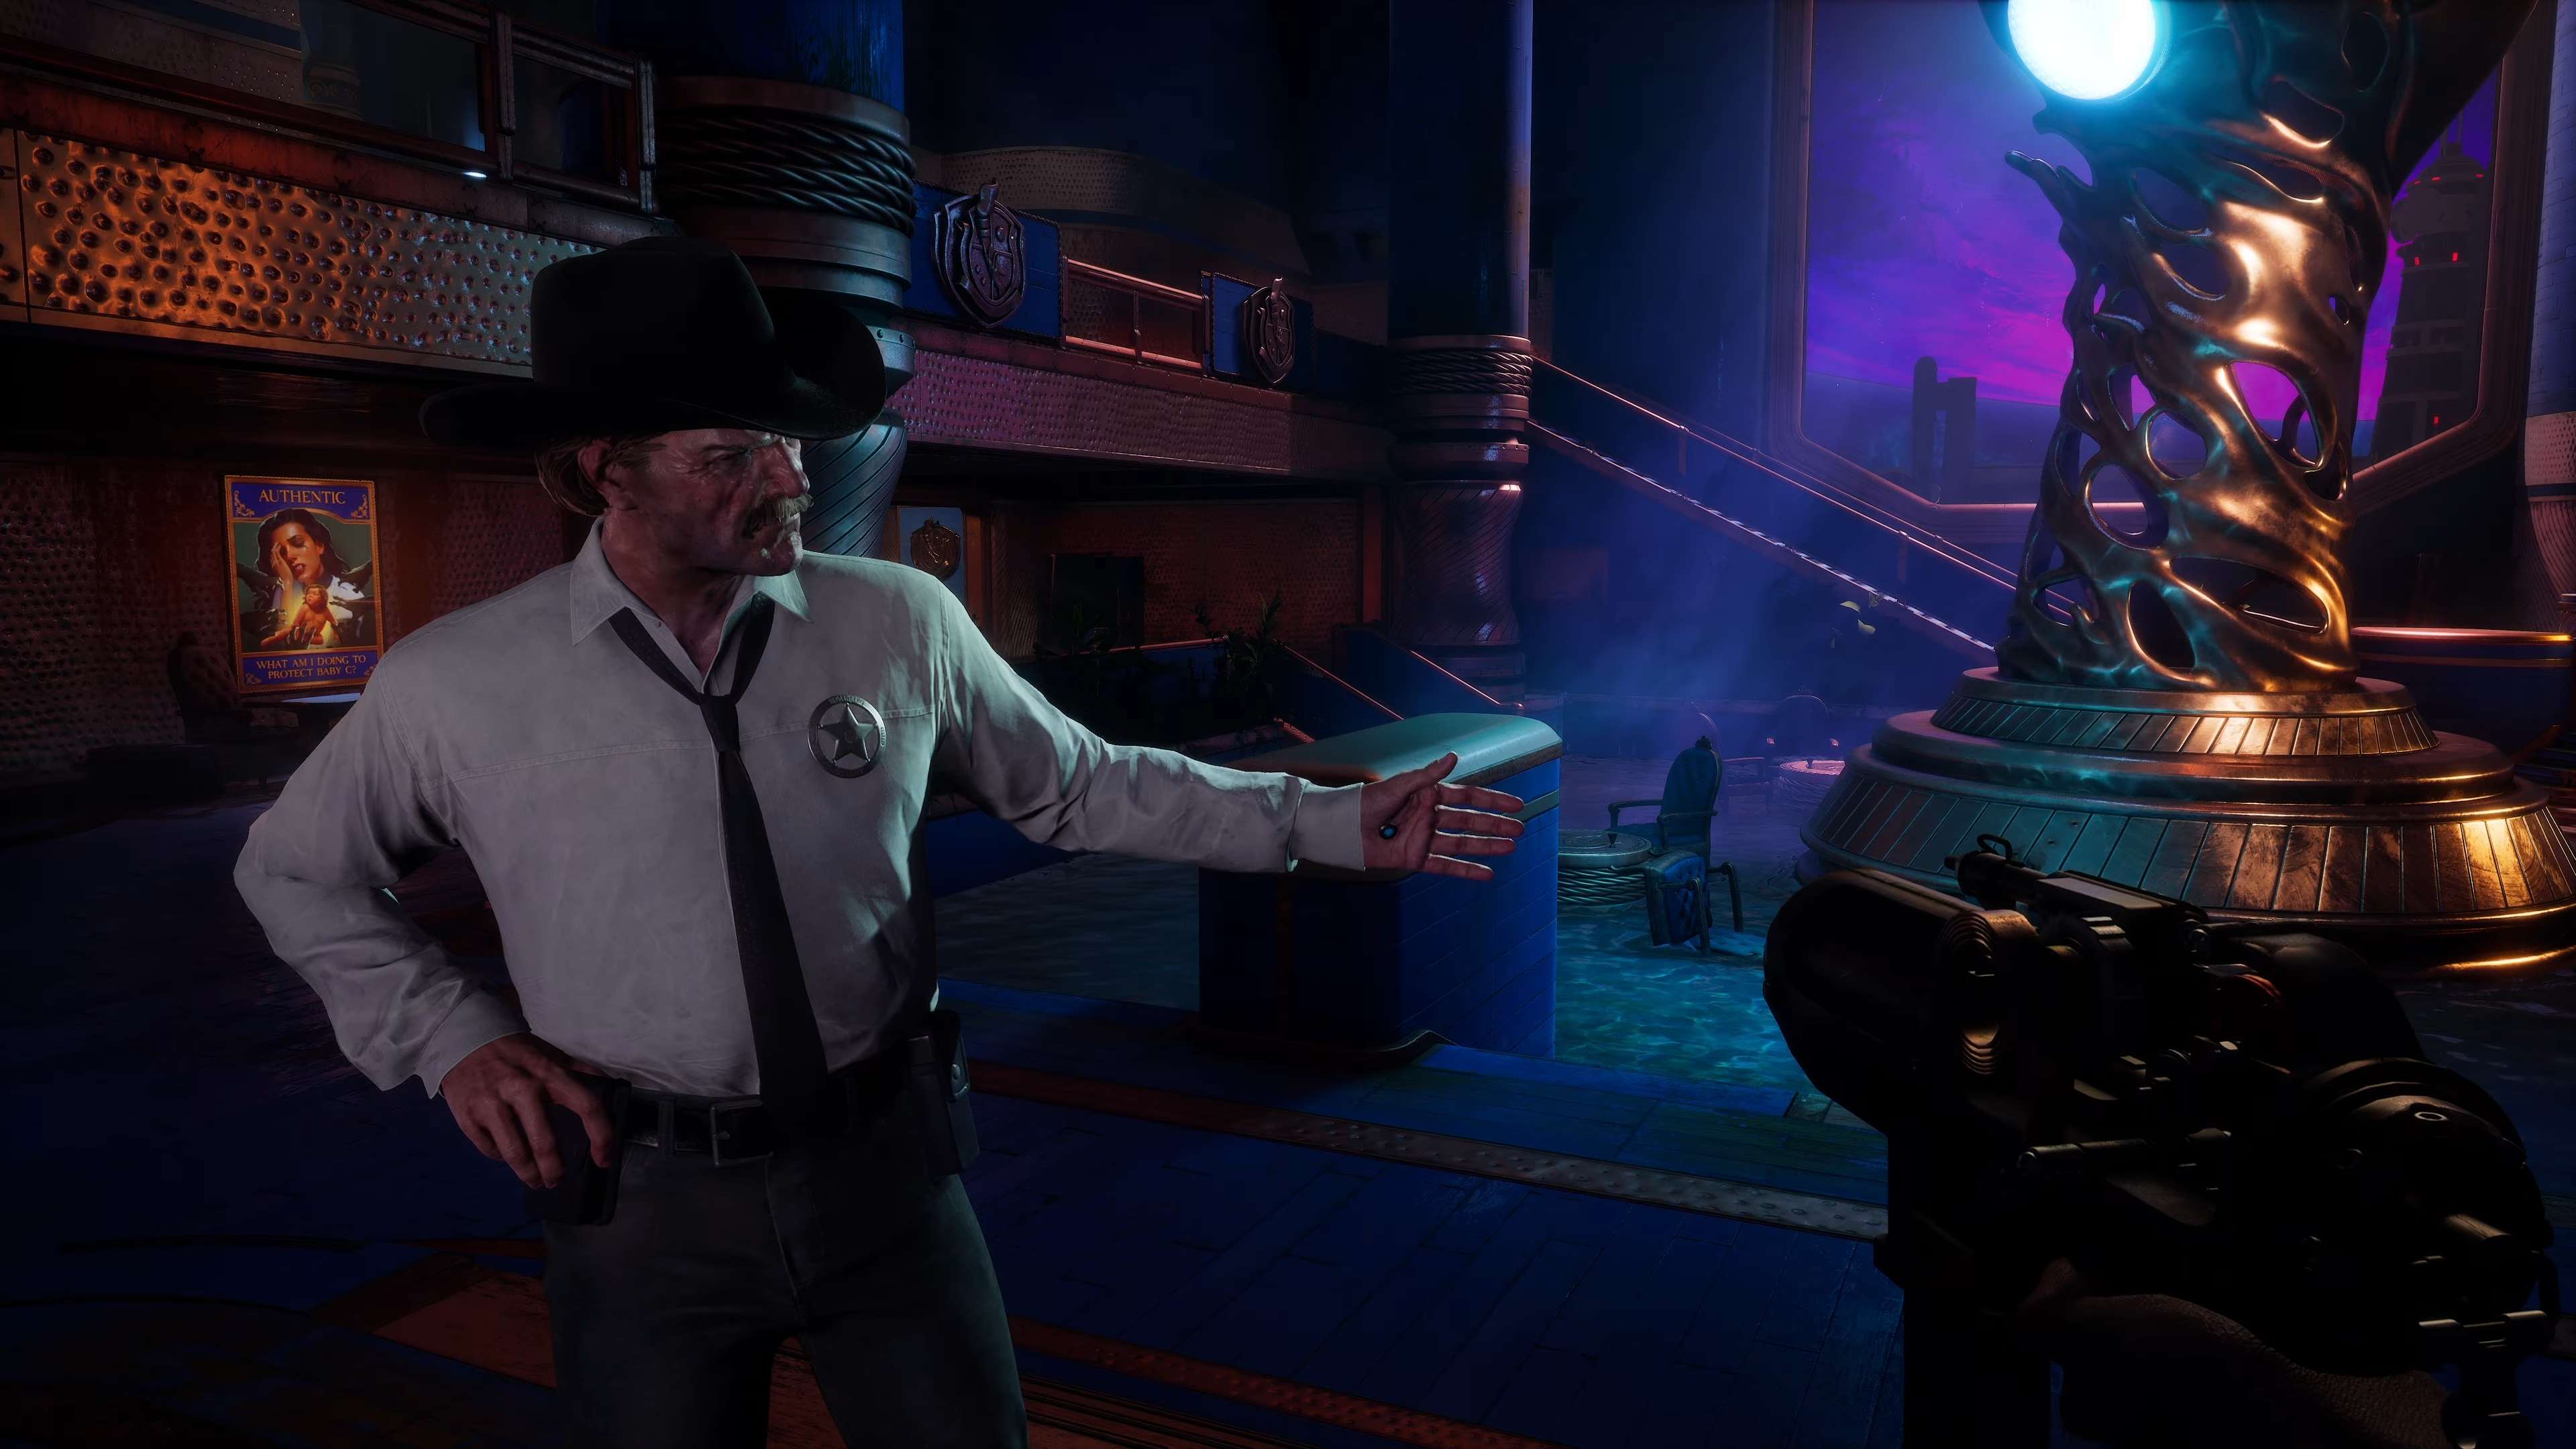 A male NPC dressed as an old west sheriff addresses the titular character of Judas, while gesturing around a flooded and dimly-lit room.